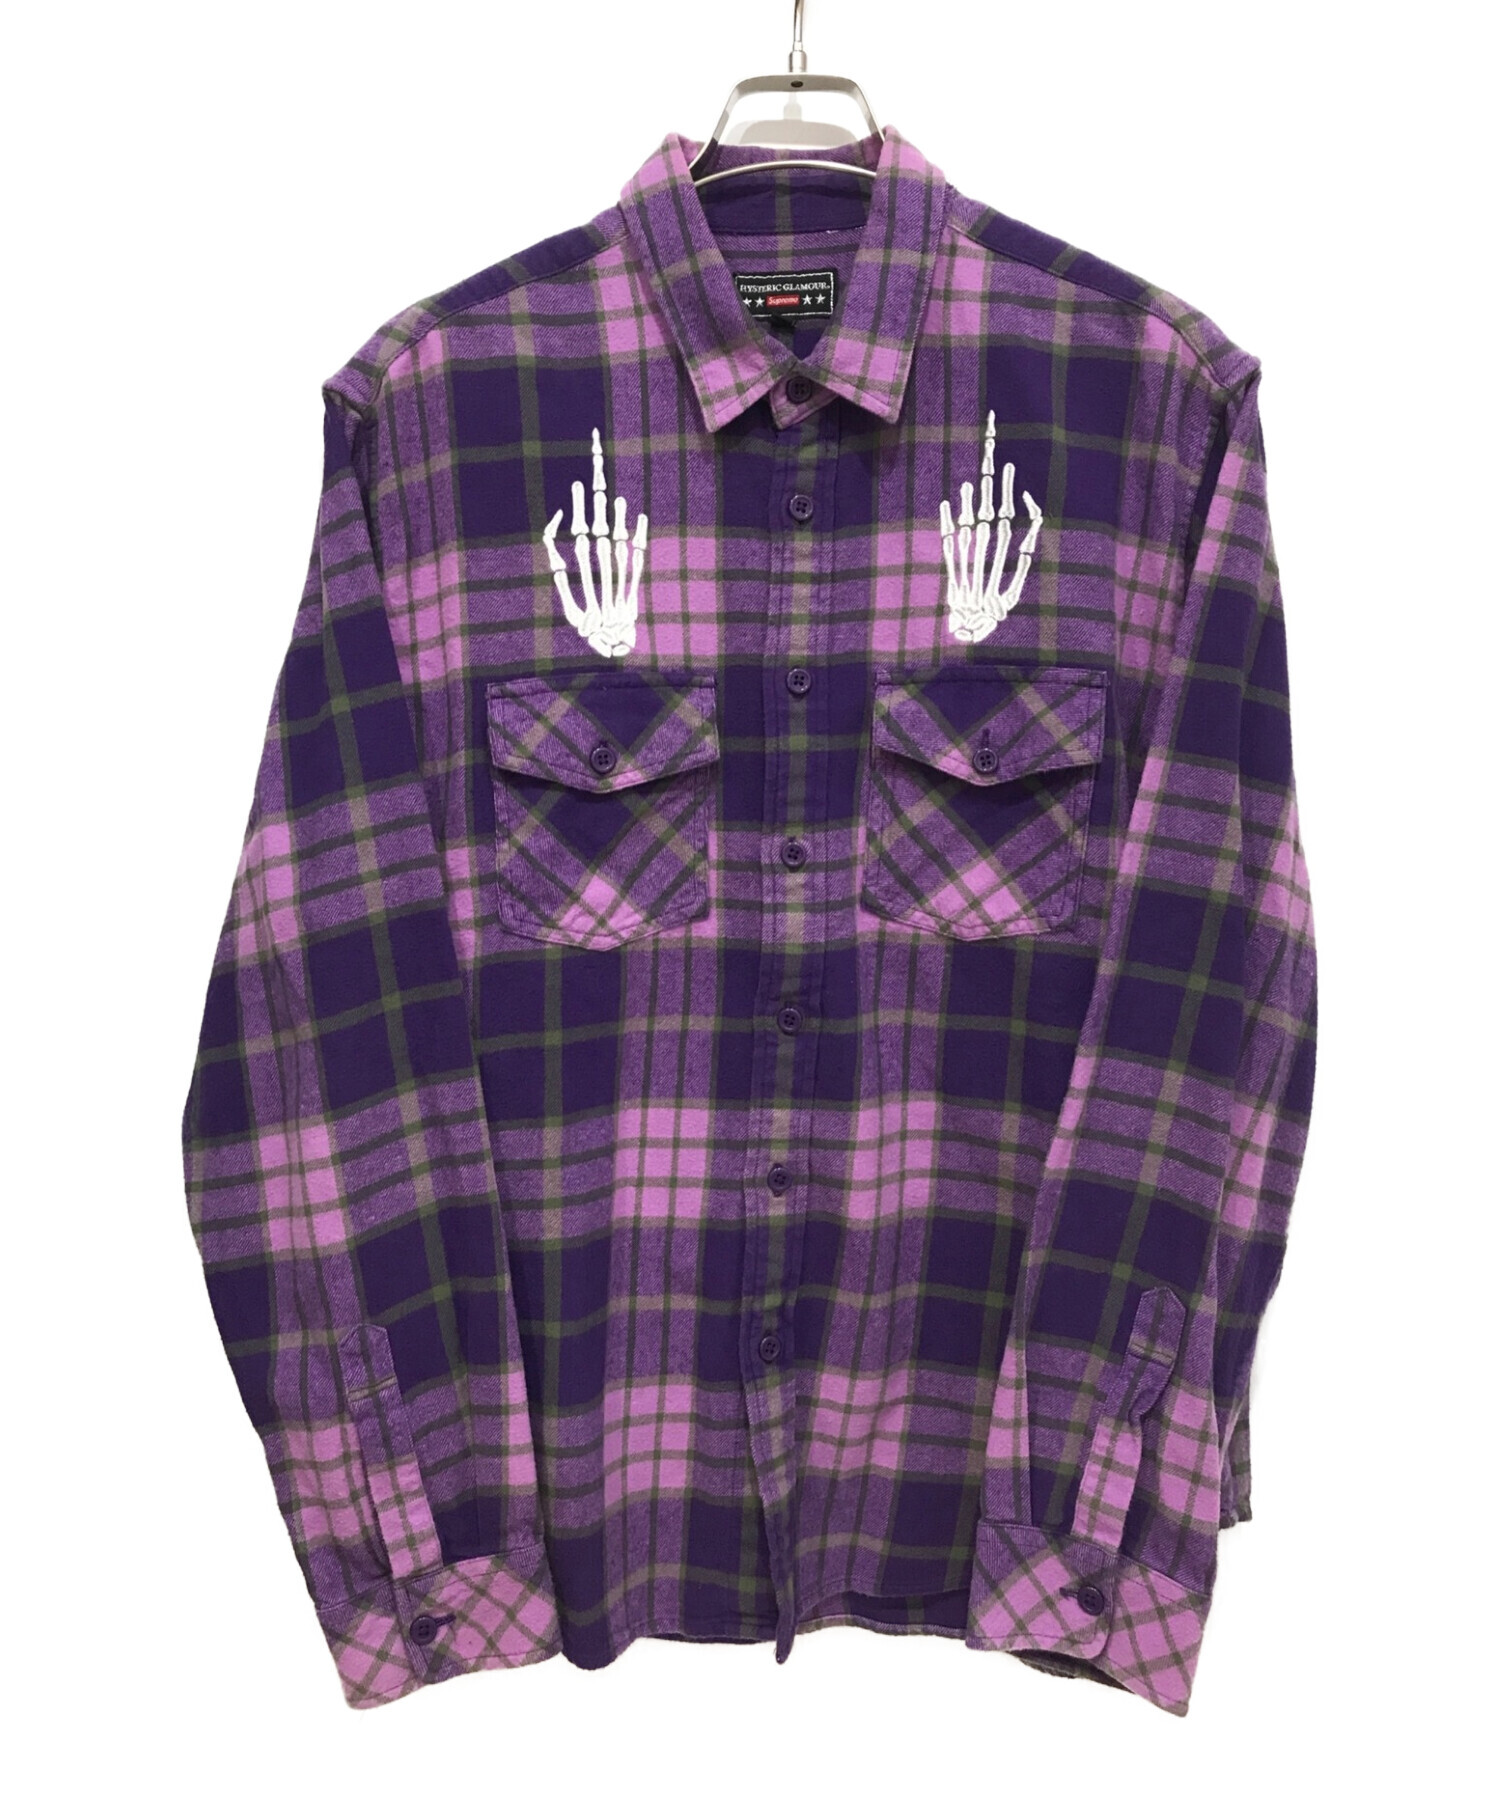 Supreme HYSTERIC GLAMOUR Flannel Shirt 紫